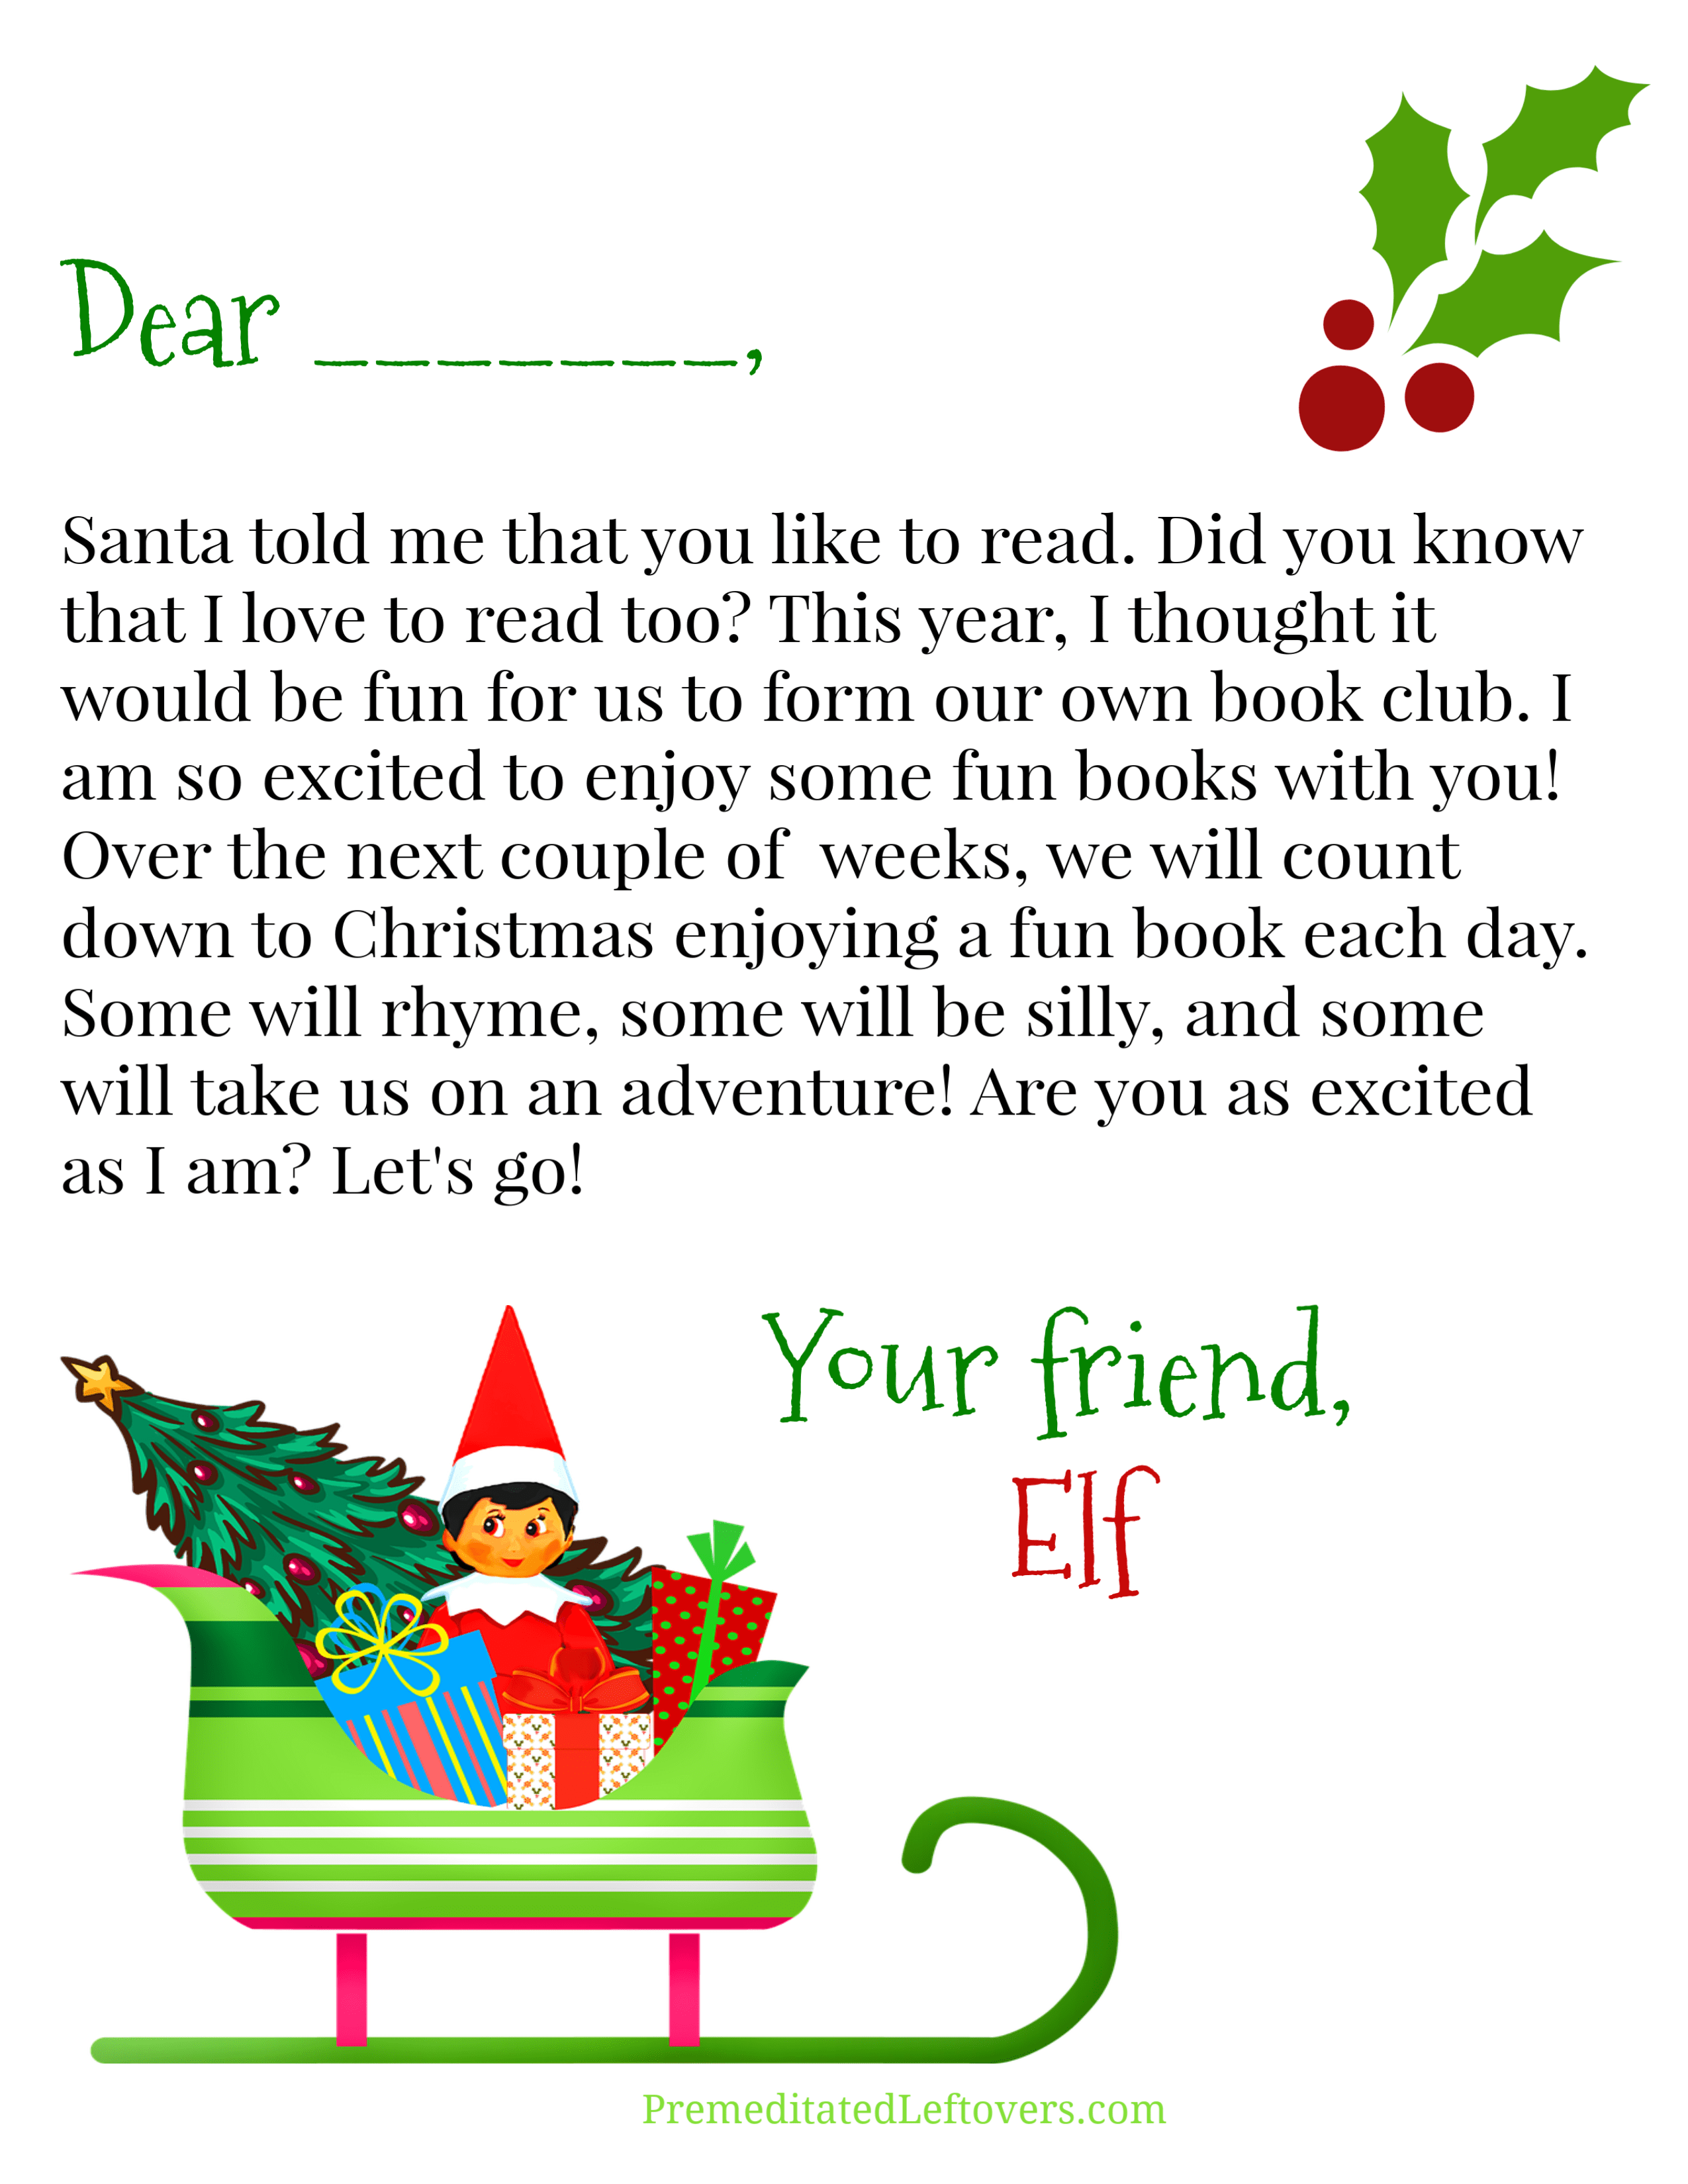 Elf on the Shelf Book Club Welcome Letter - signed by Elf